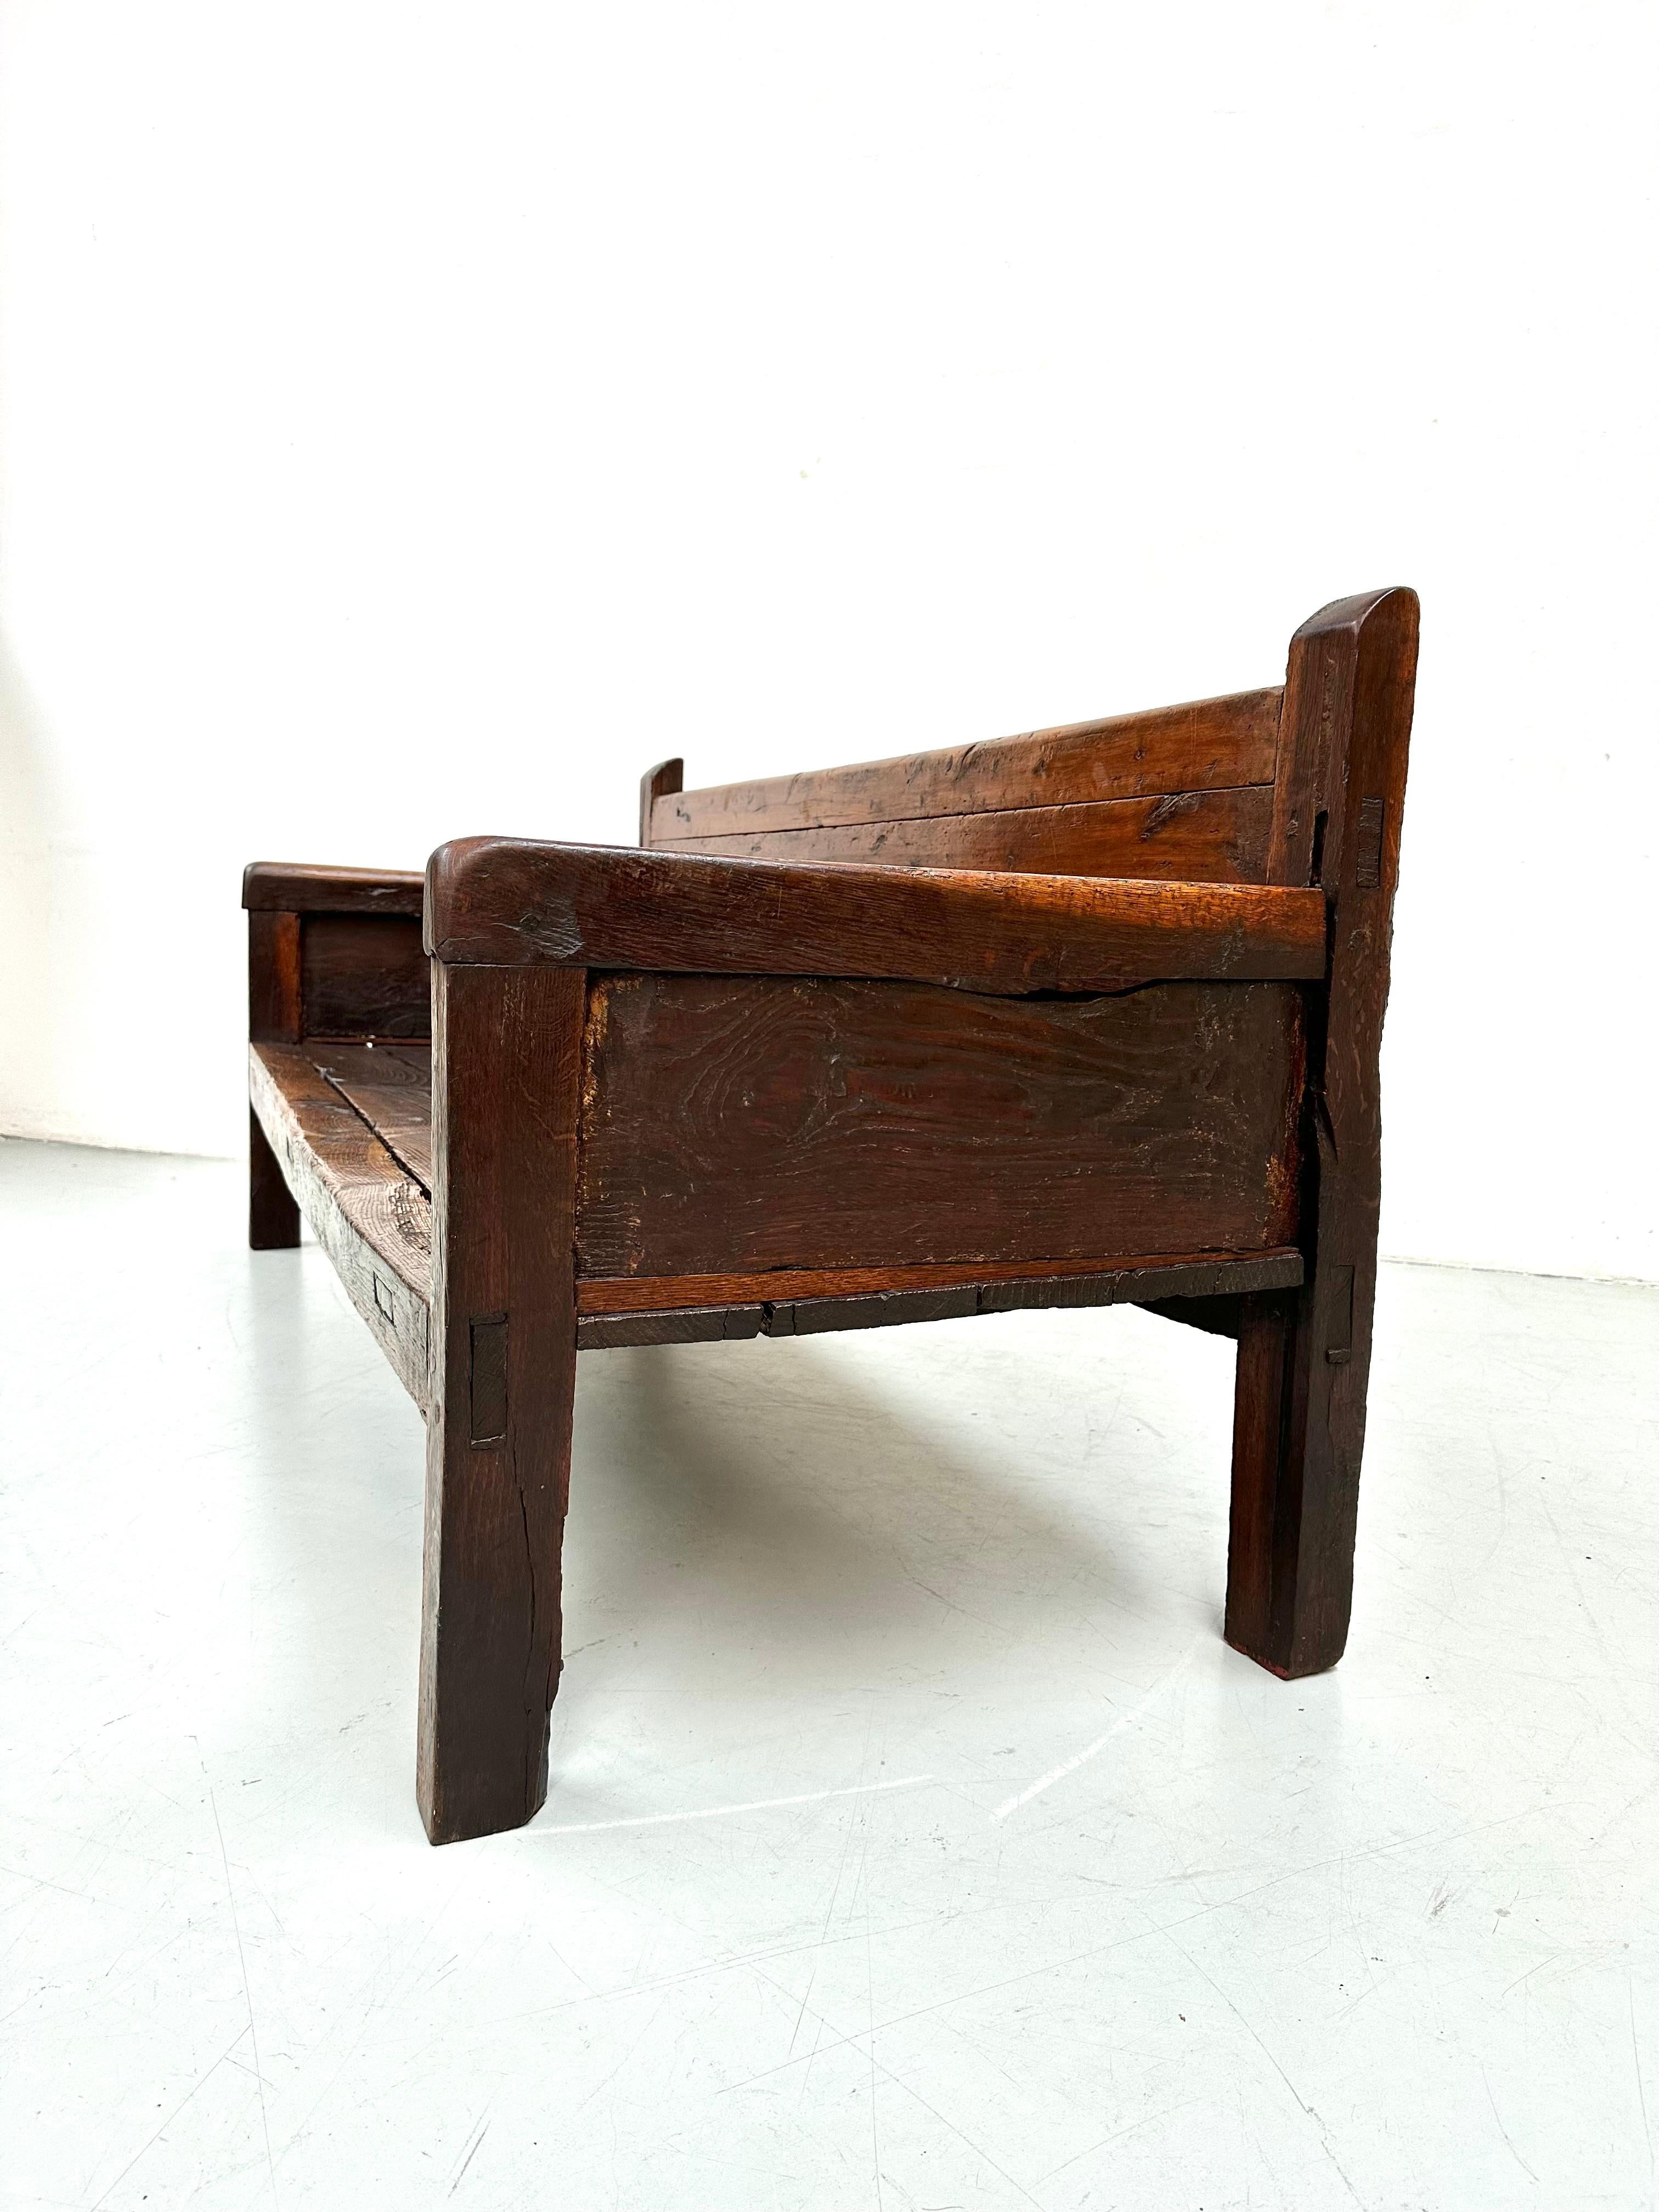 Antique Handmade Minimalistic Spanish Chestnut Wood Bench, Early 19th Century For Sale 10